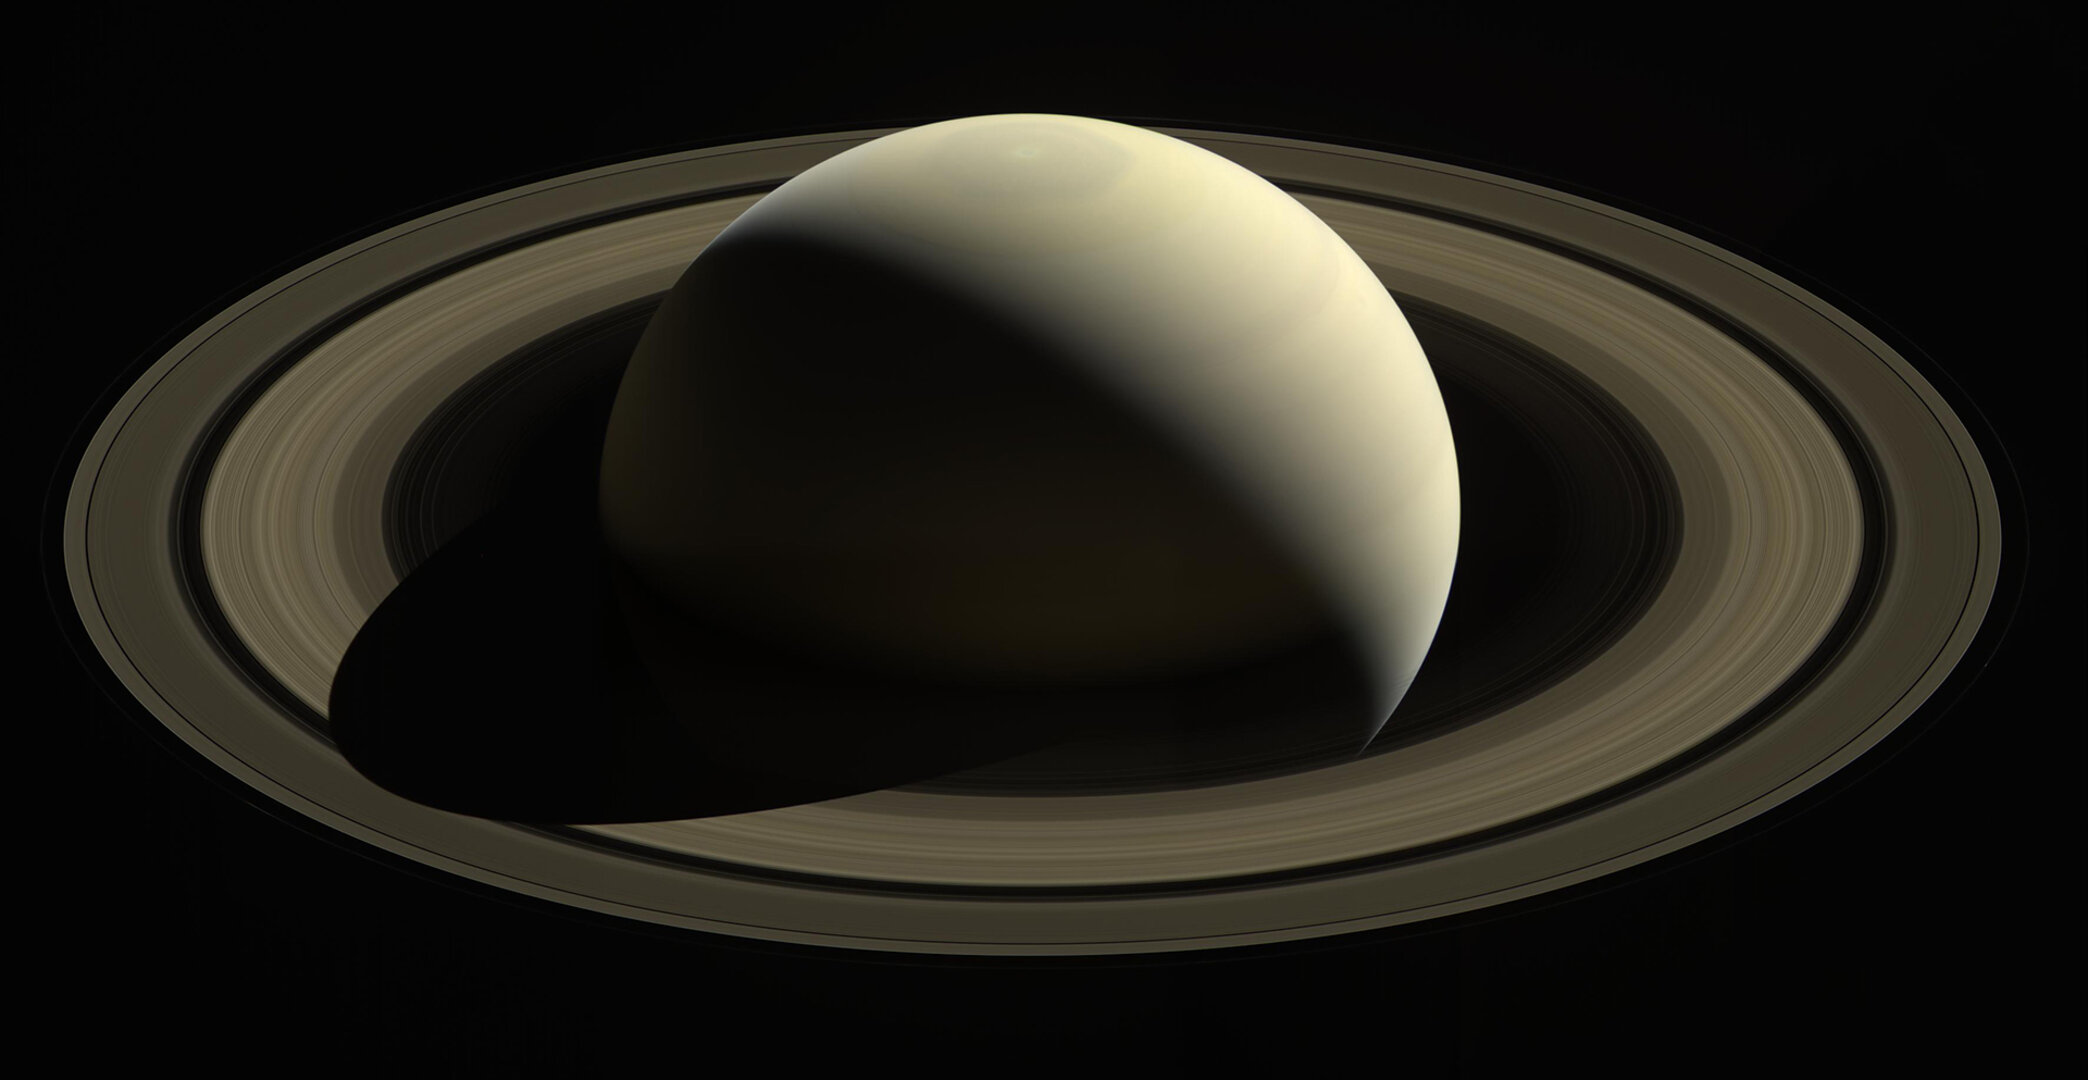 The ringed planet Saturn is sometimes called “the jewel of the Solar System” because it is so beautiful